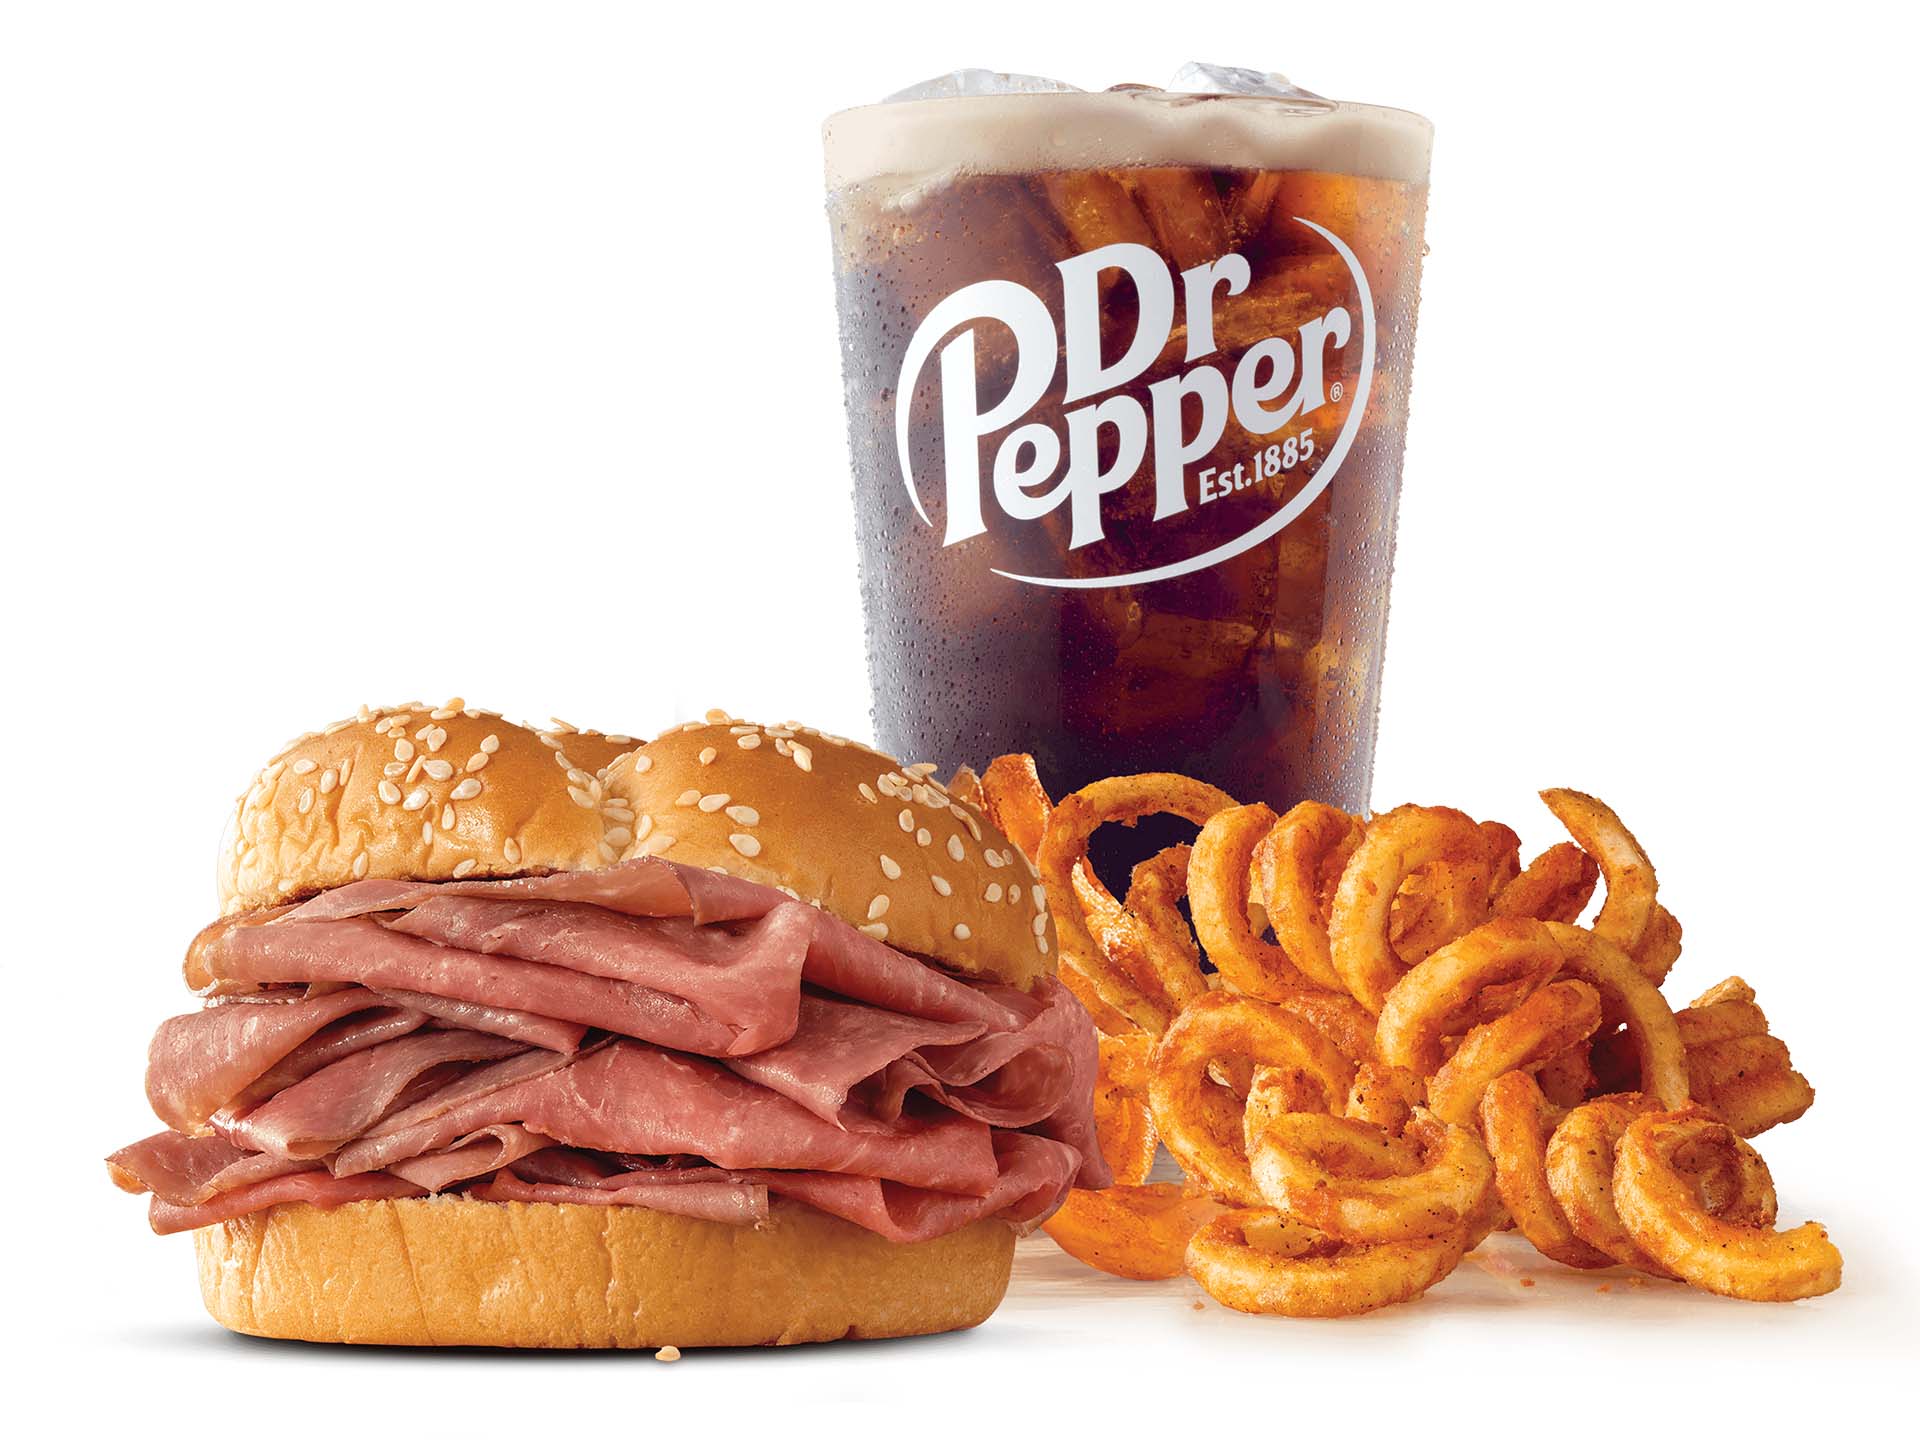 Arby's classic roast beef meal in Sayreville, NJ